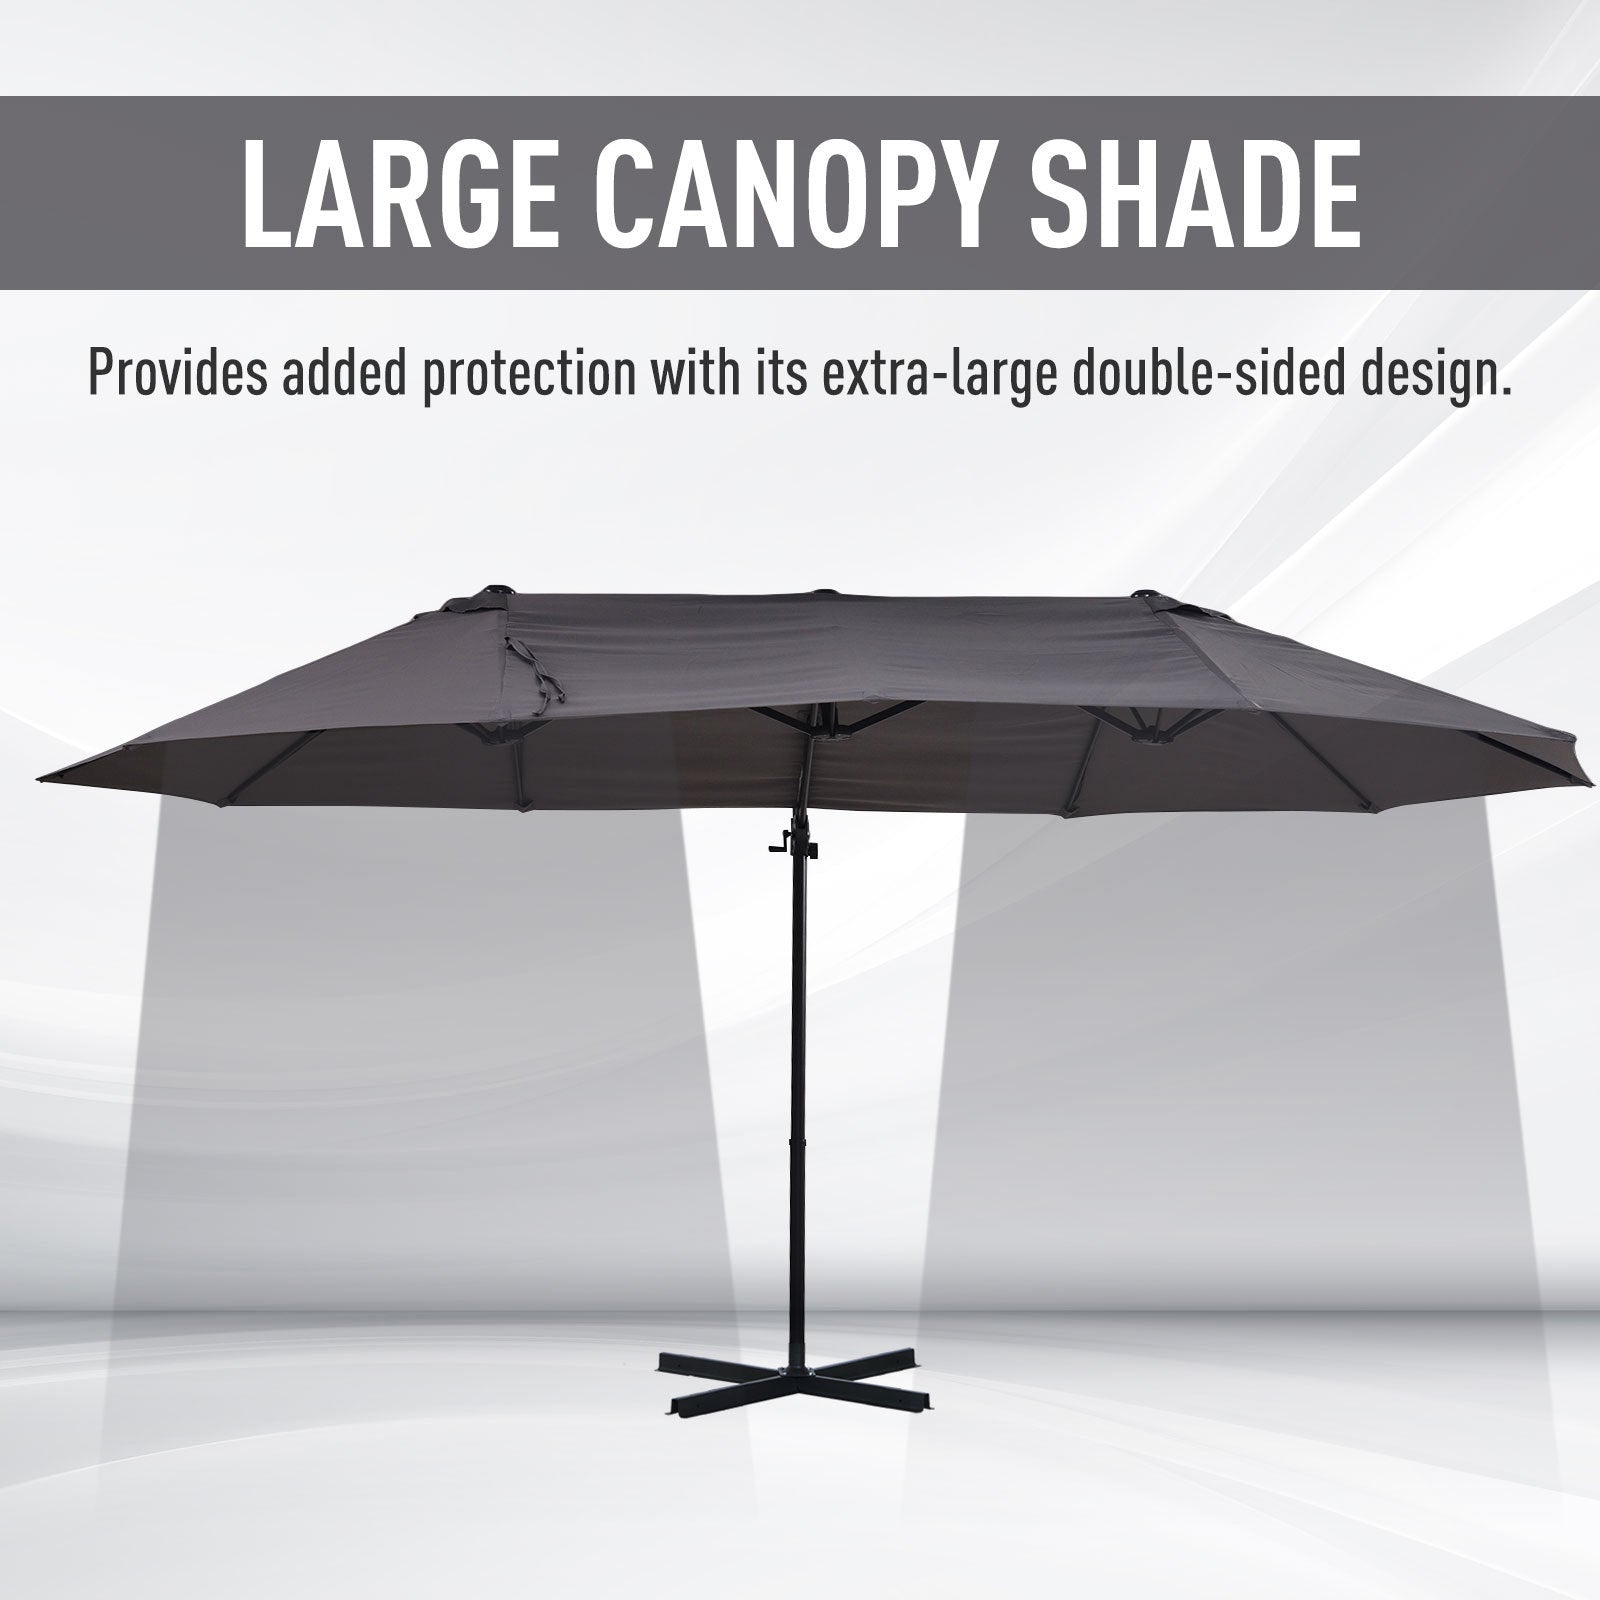 14ft Patio Umbrella Double-Sided Outdoor Market Extra Large Umbrella with Crank, Cross Base for Deck, Lawn, Backyard and Pool - Grey